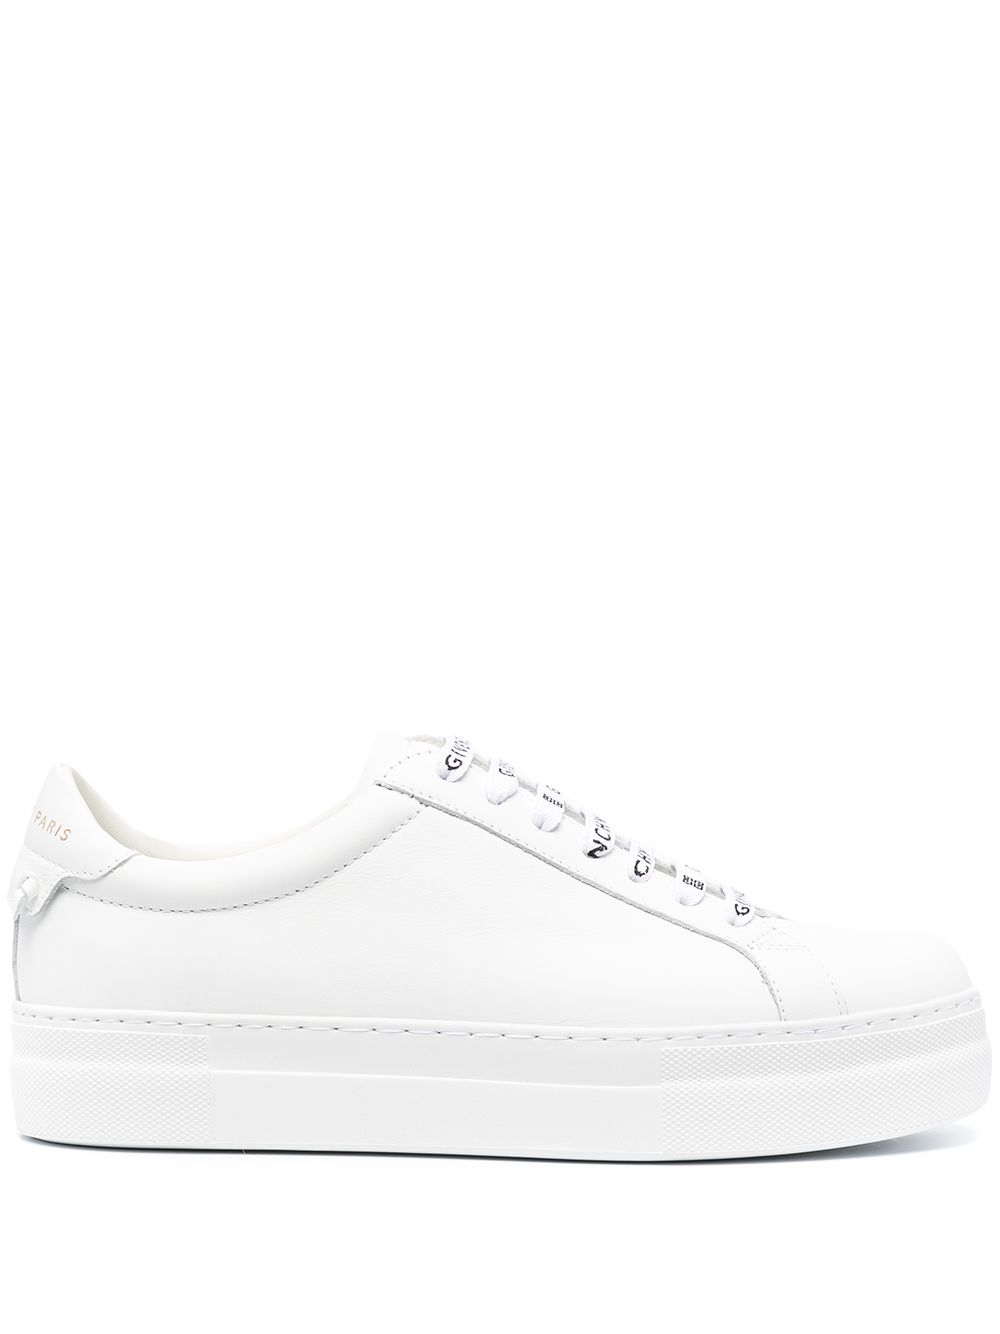 Urbal Leather Sneakers дамски обувки Givenchy 846849582_36